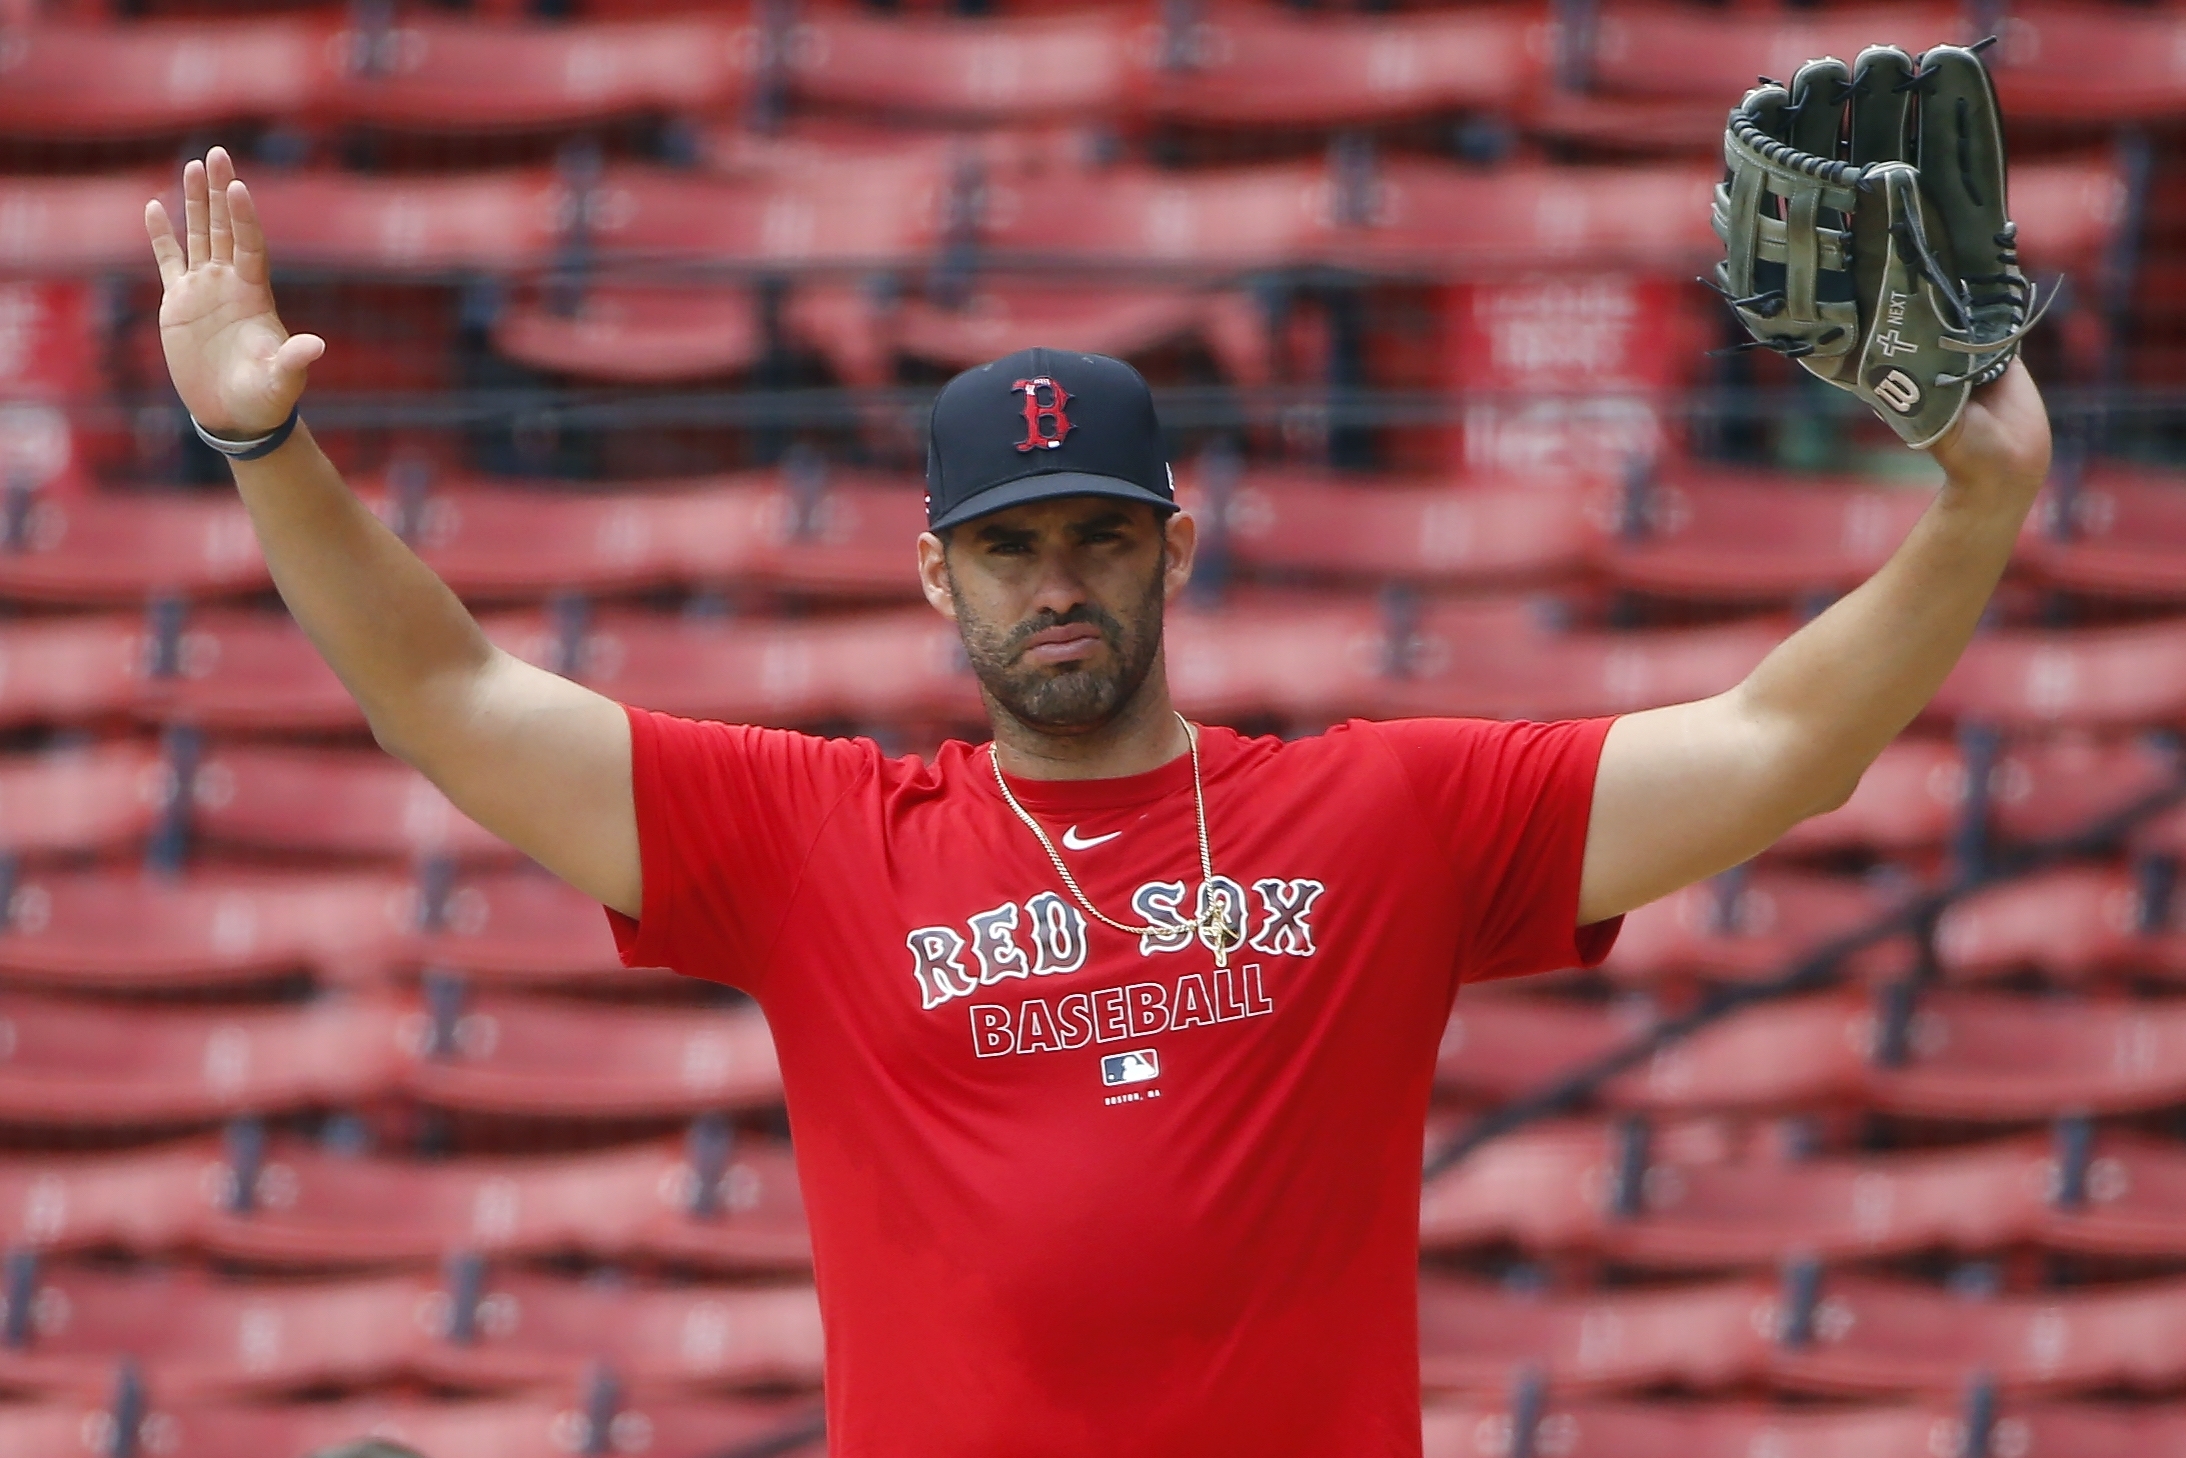 J.D. Martinez, Boston Red Sox DH: 'I honestly feel I would not